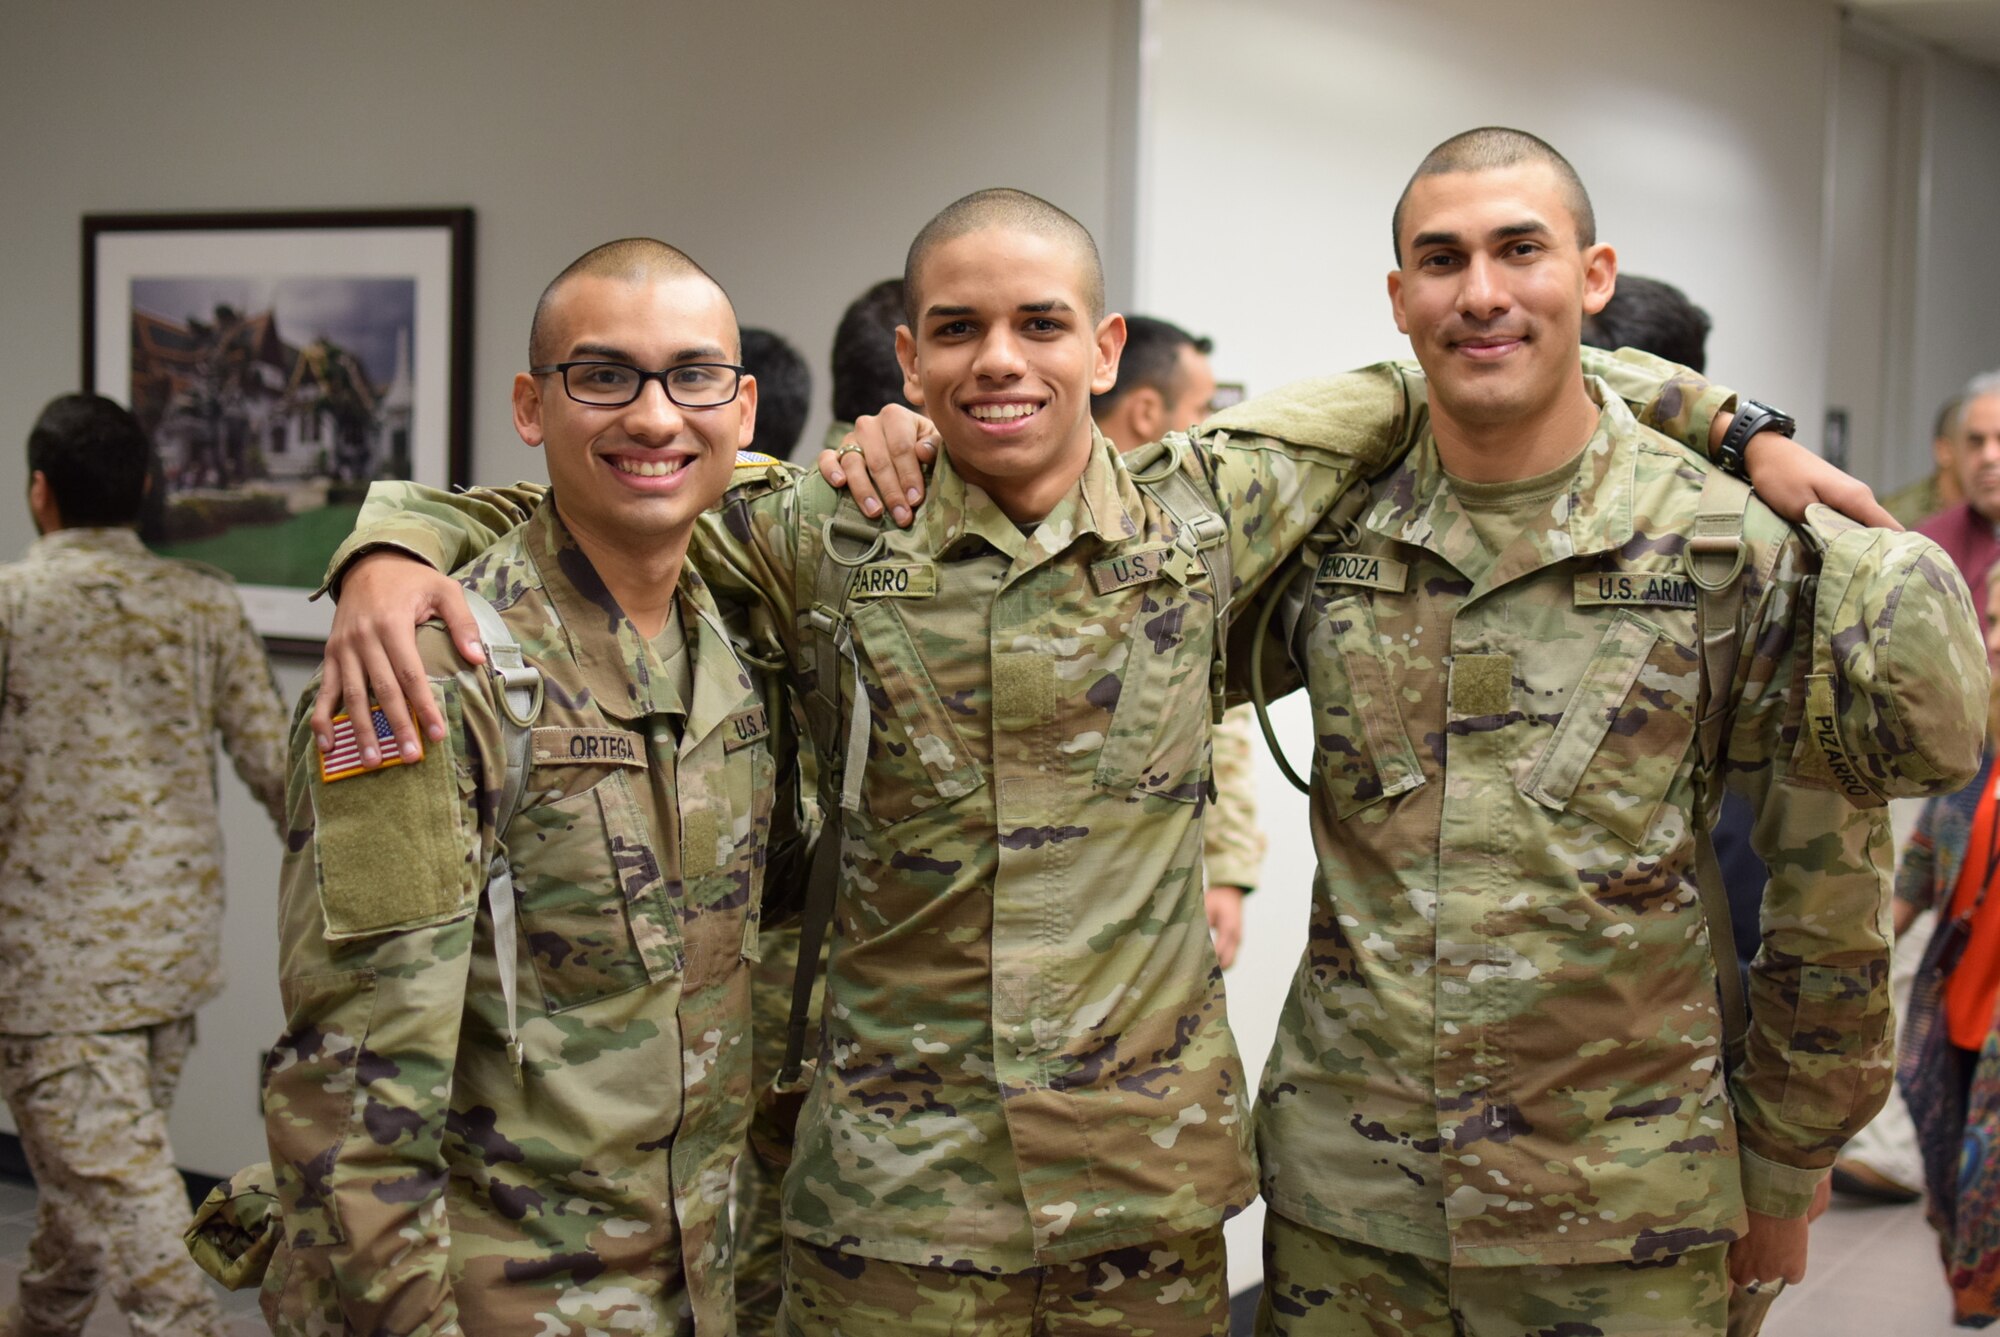 Echo Company trainees pose for a photo in a Defense Language Institute English Language Center hallway between classes. Along with English language training and pre-basic training, trainees have the opportunity to react with the 70 other unique countries on campus at one time.